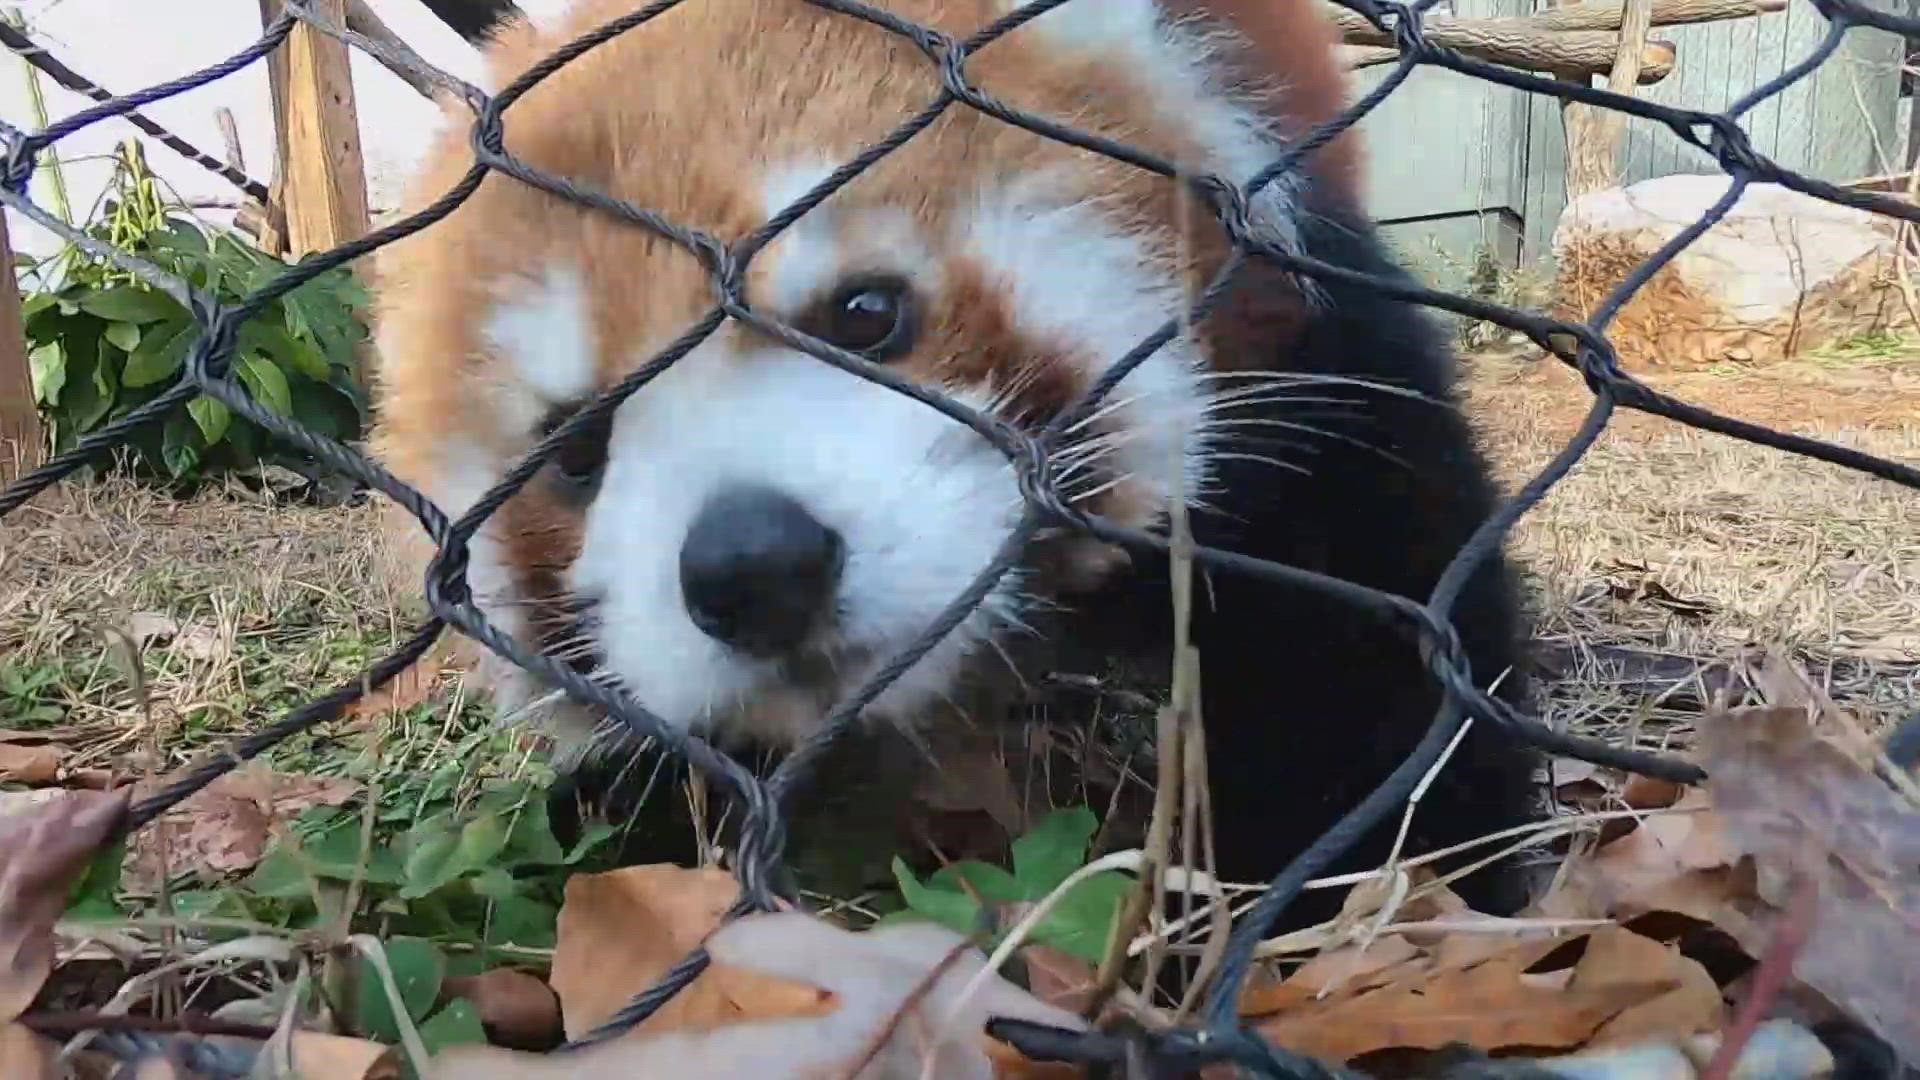 The Greensboro Science Center is on a mission to help restore the endangered population of Red Pandas.